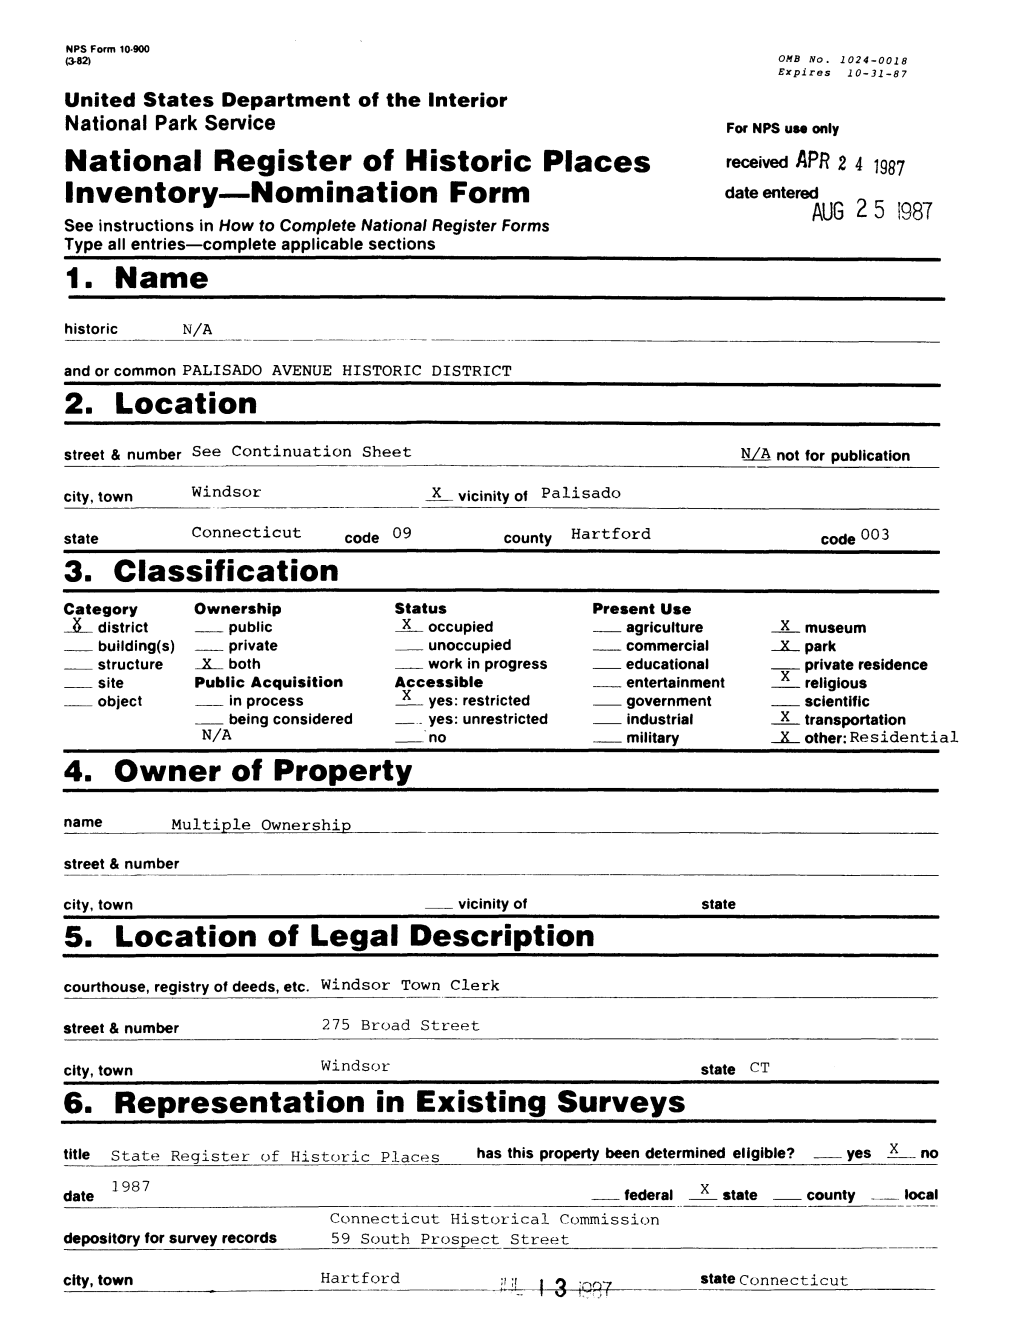 National Register of Historic Places Inventory Nomination Form Palisado Avenue Historic District Continuation Sheet Windsor